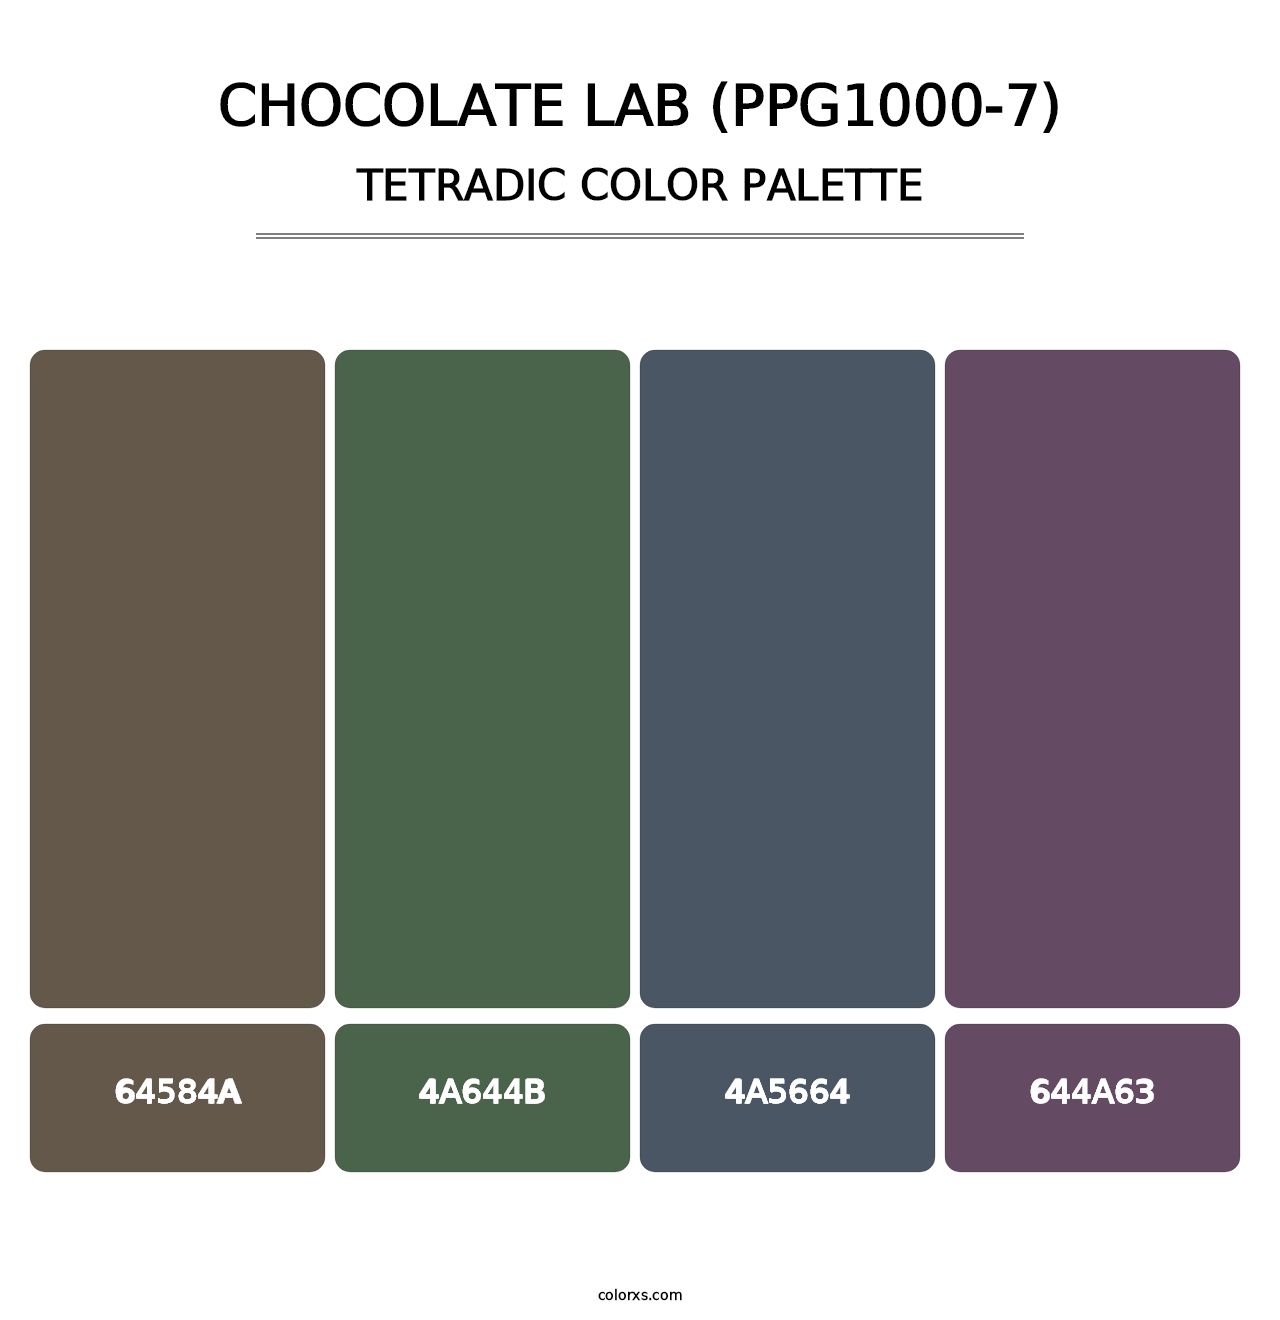 Chocolate Lab (PPG1000-7) - Tetradic Color Palette